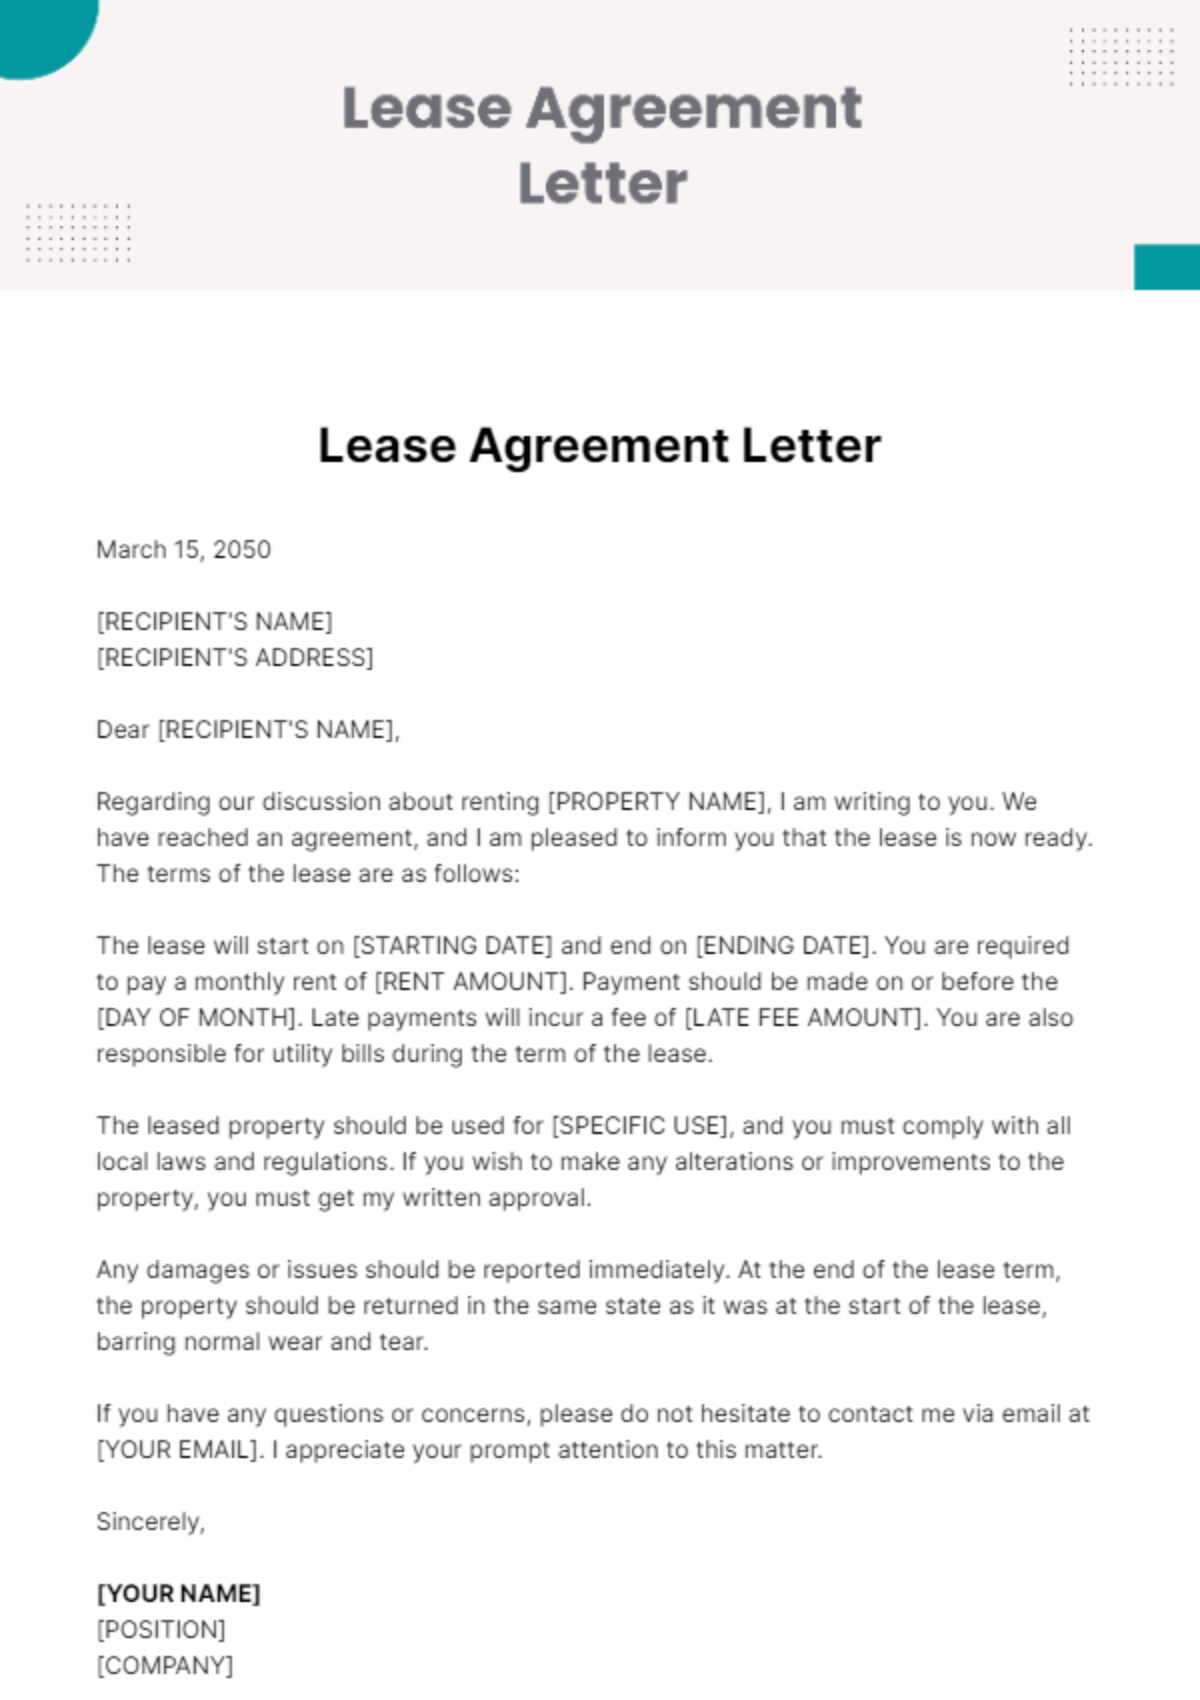 Free Lease Agreement Letter Template